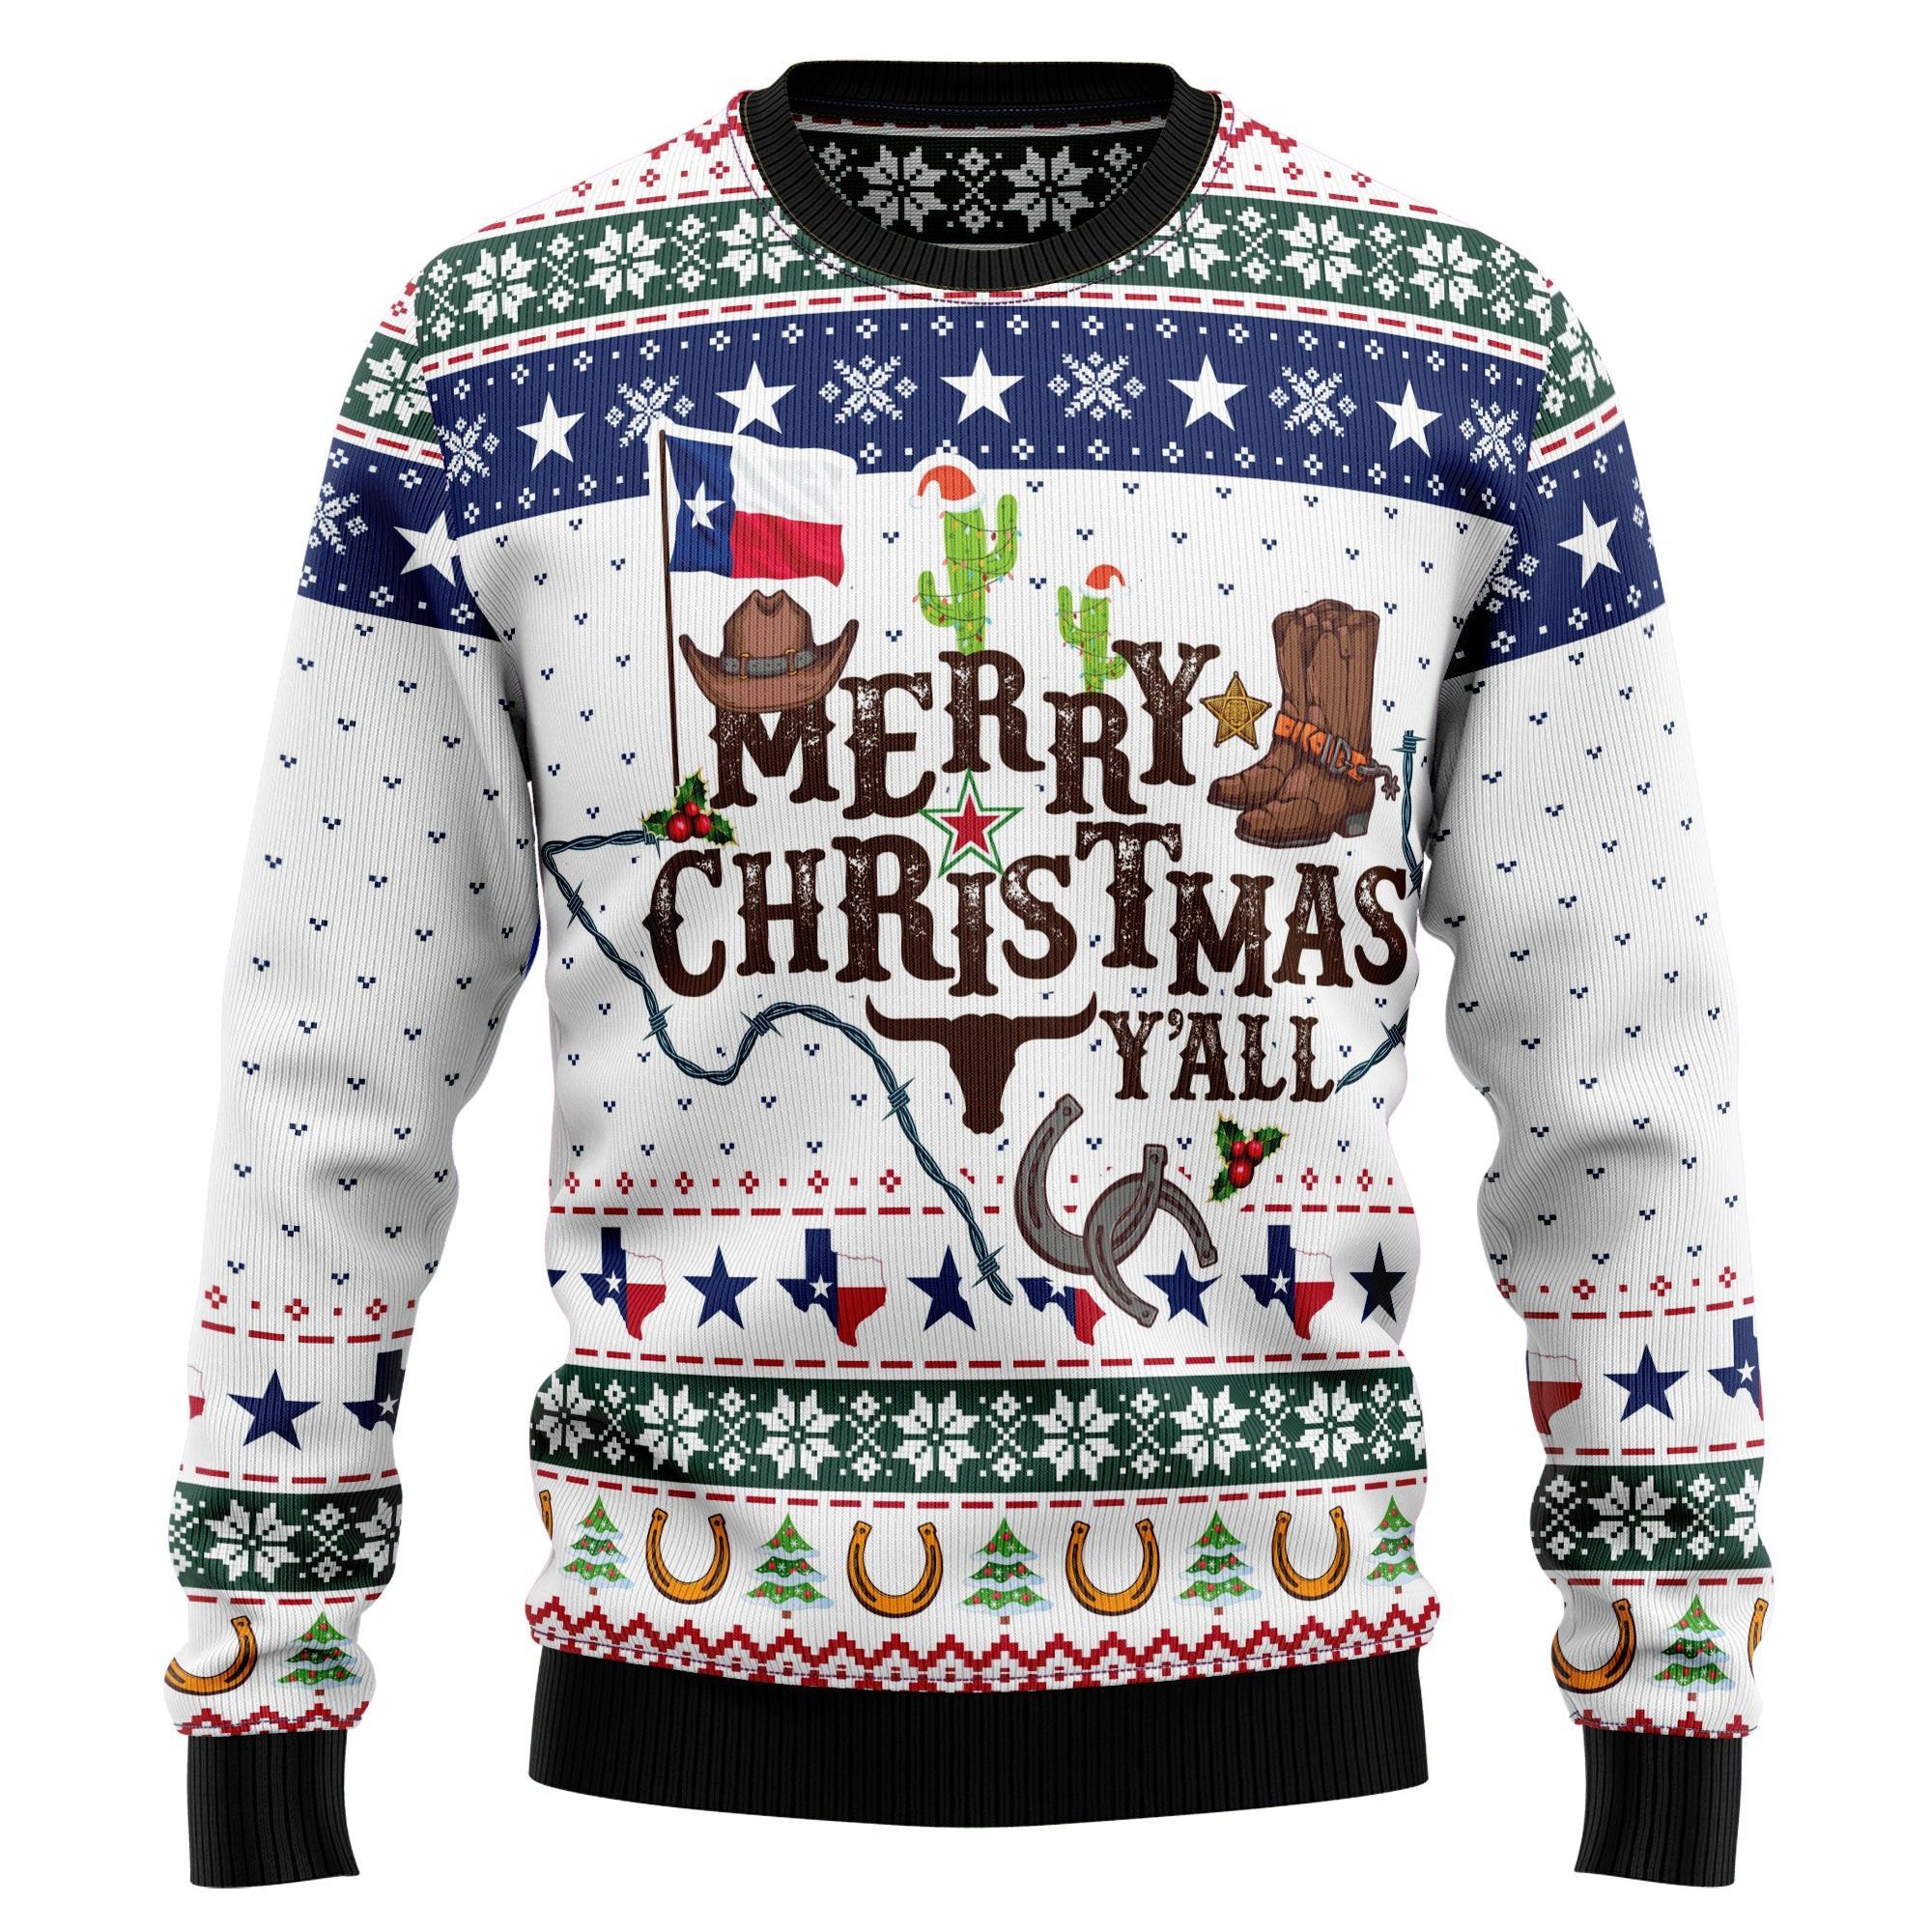 Merry Christmas Yall Texas Ugly Christmas Sweater, Ugly Sweater For Men Women, Holiday Sweater